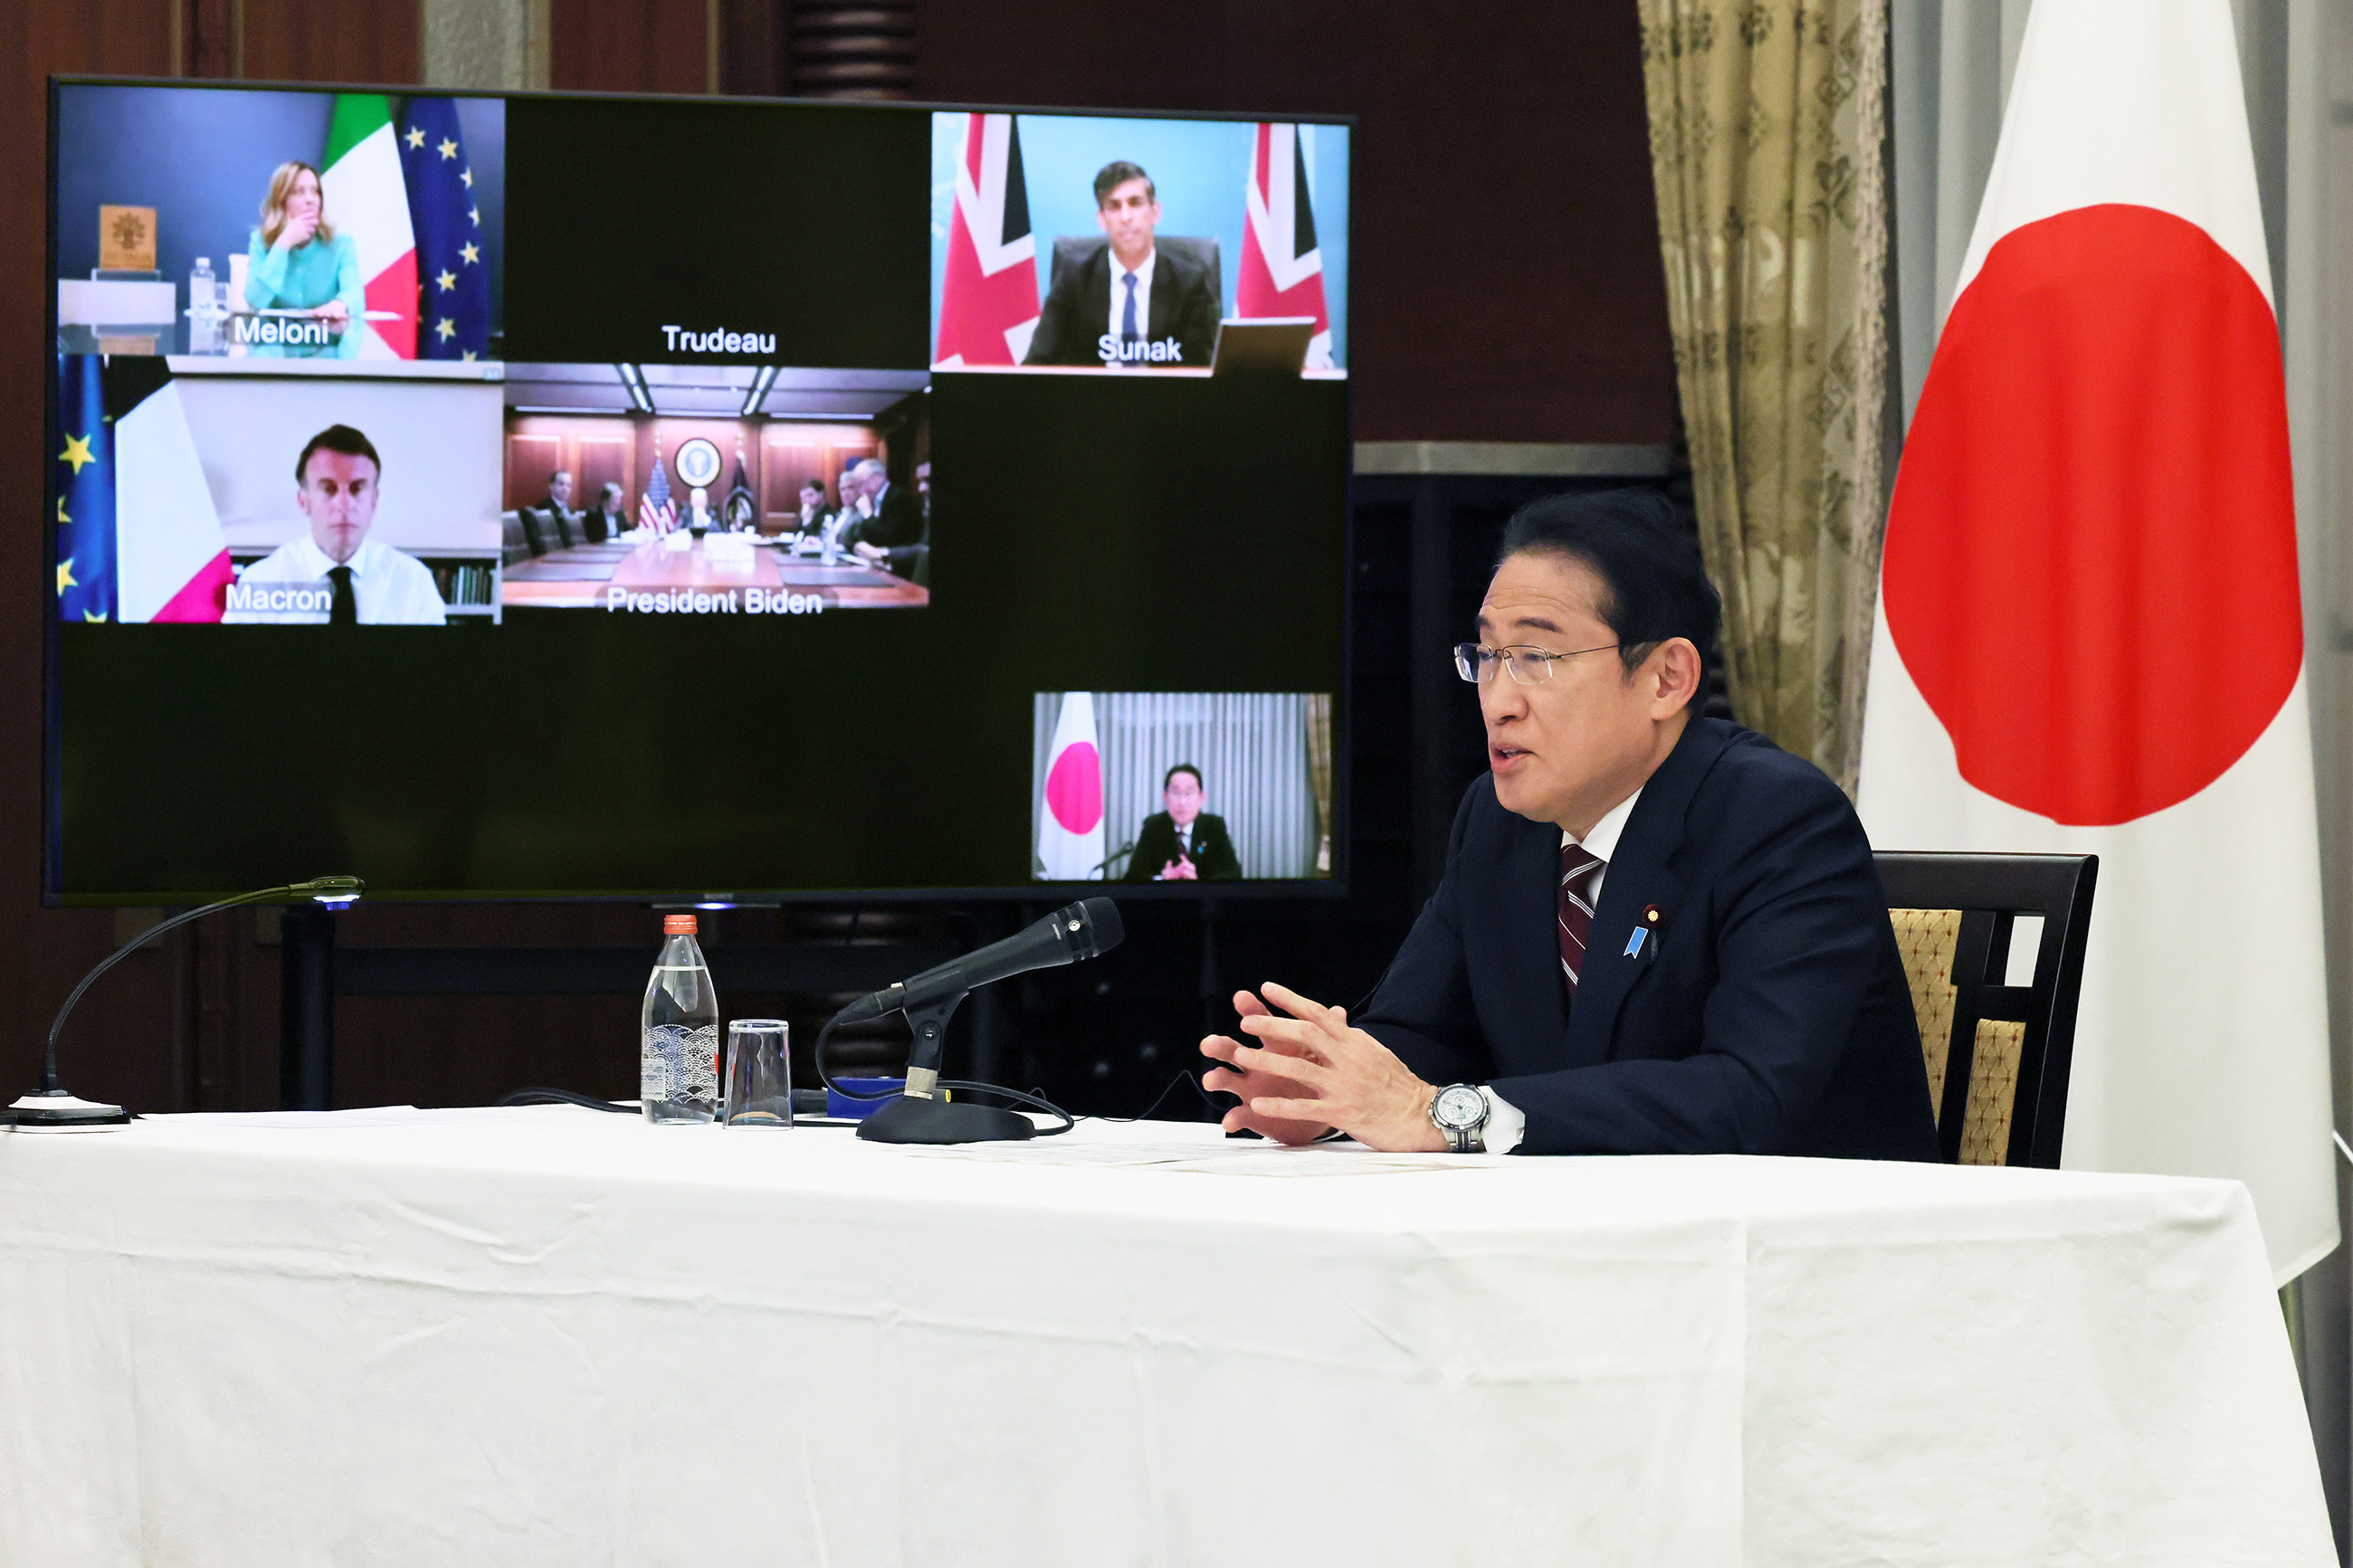 G7 Leaders’ Video Conference